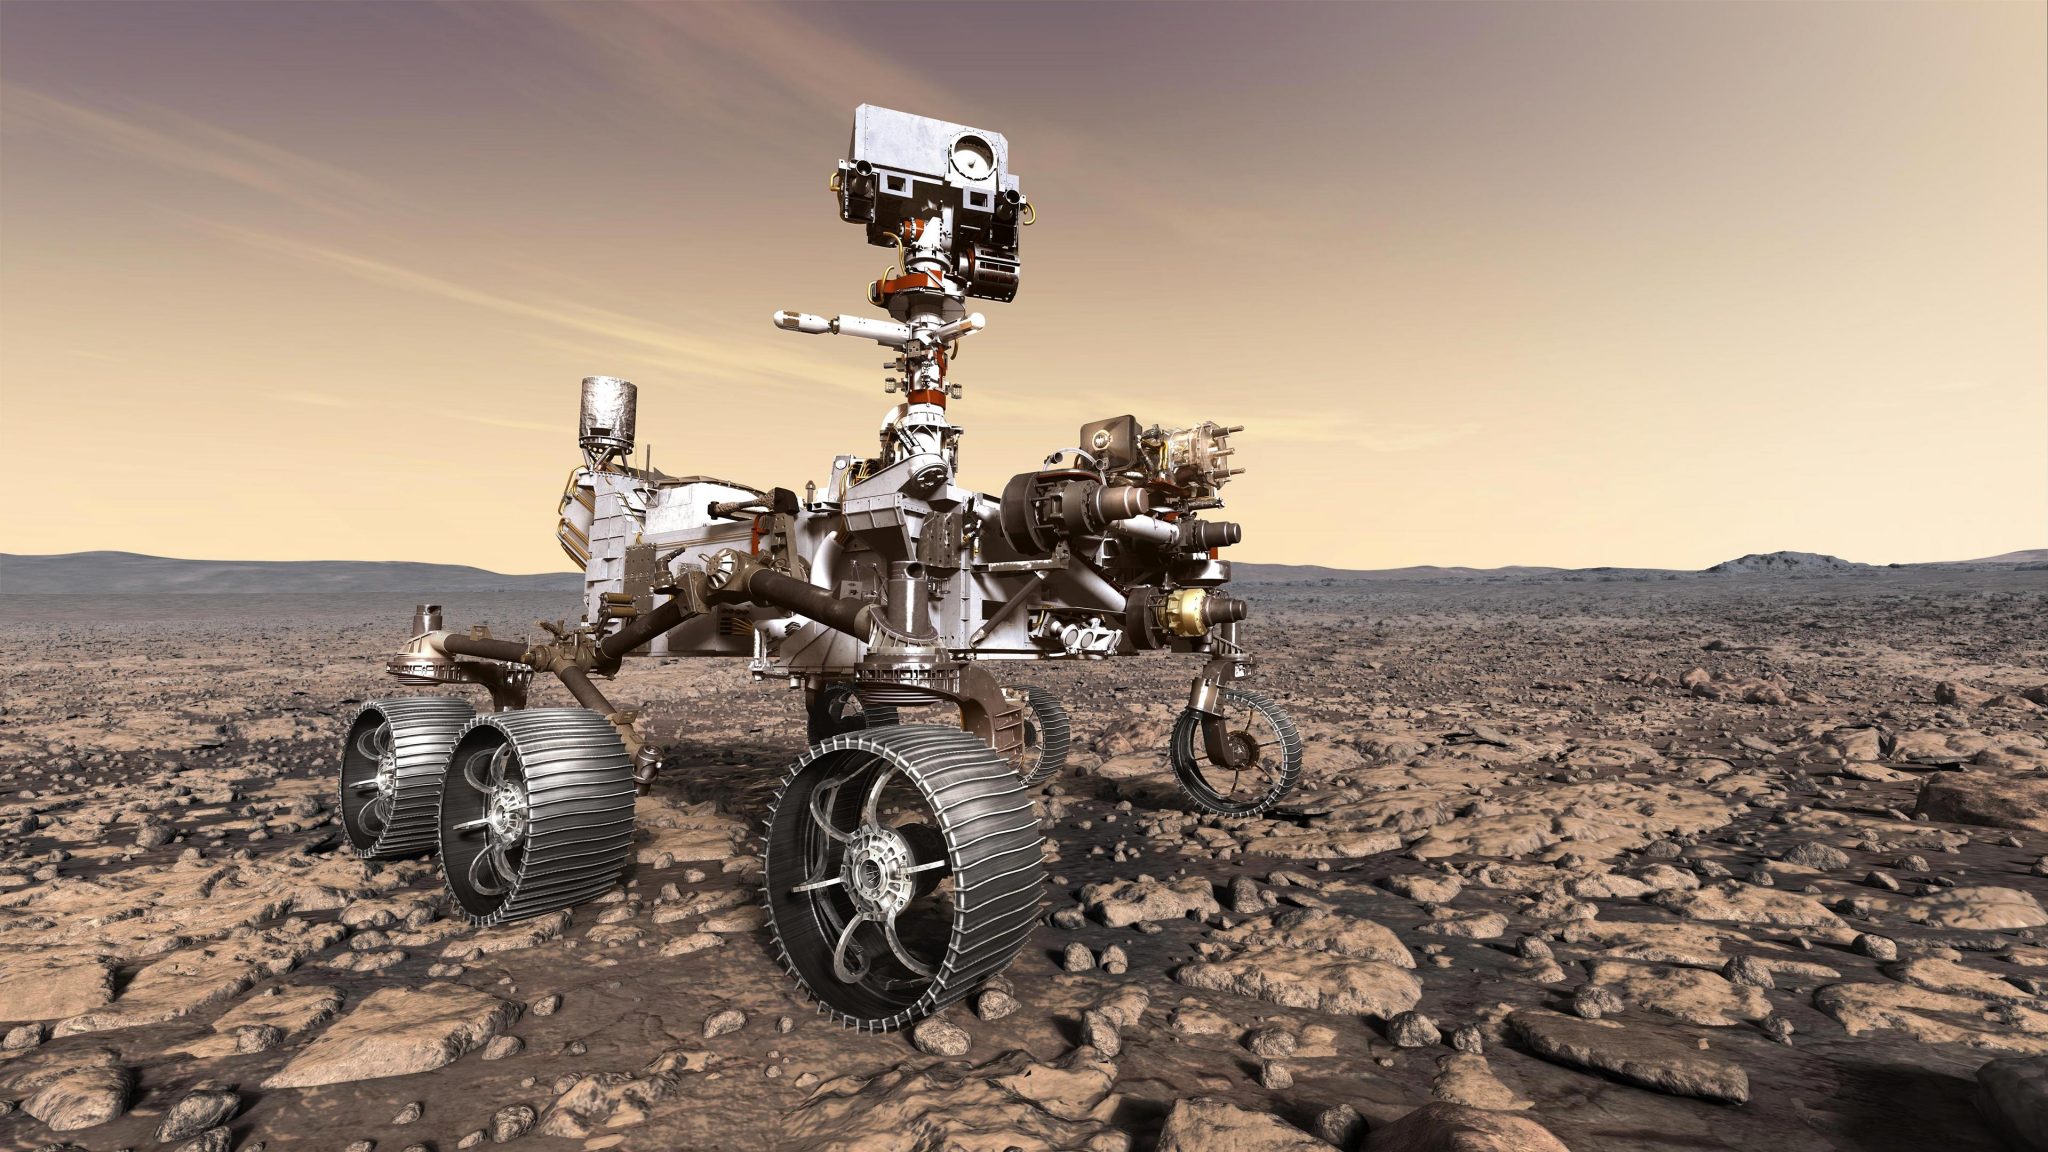 mars-report-update-on-nasa-s-perseverance-rover-curiosity-rover-video